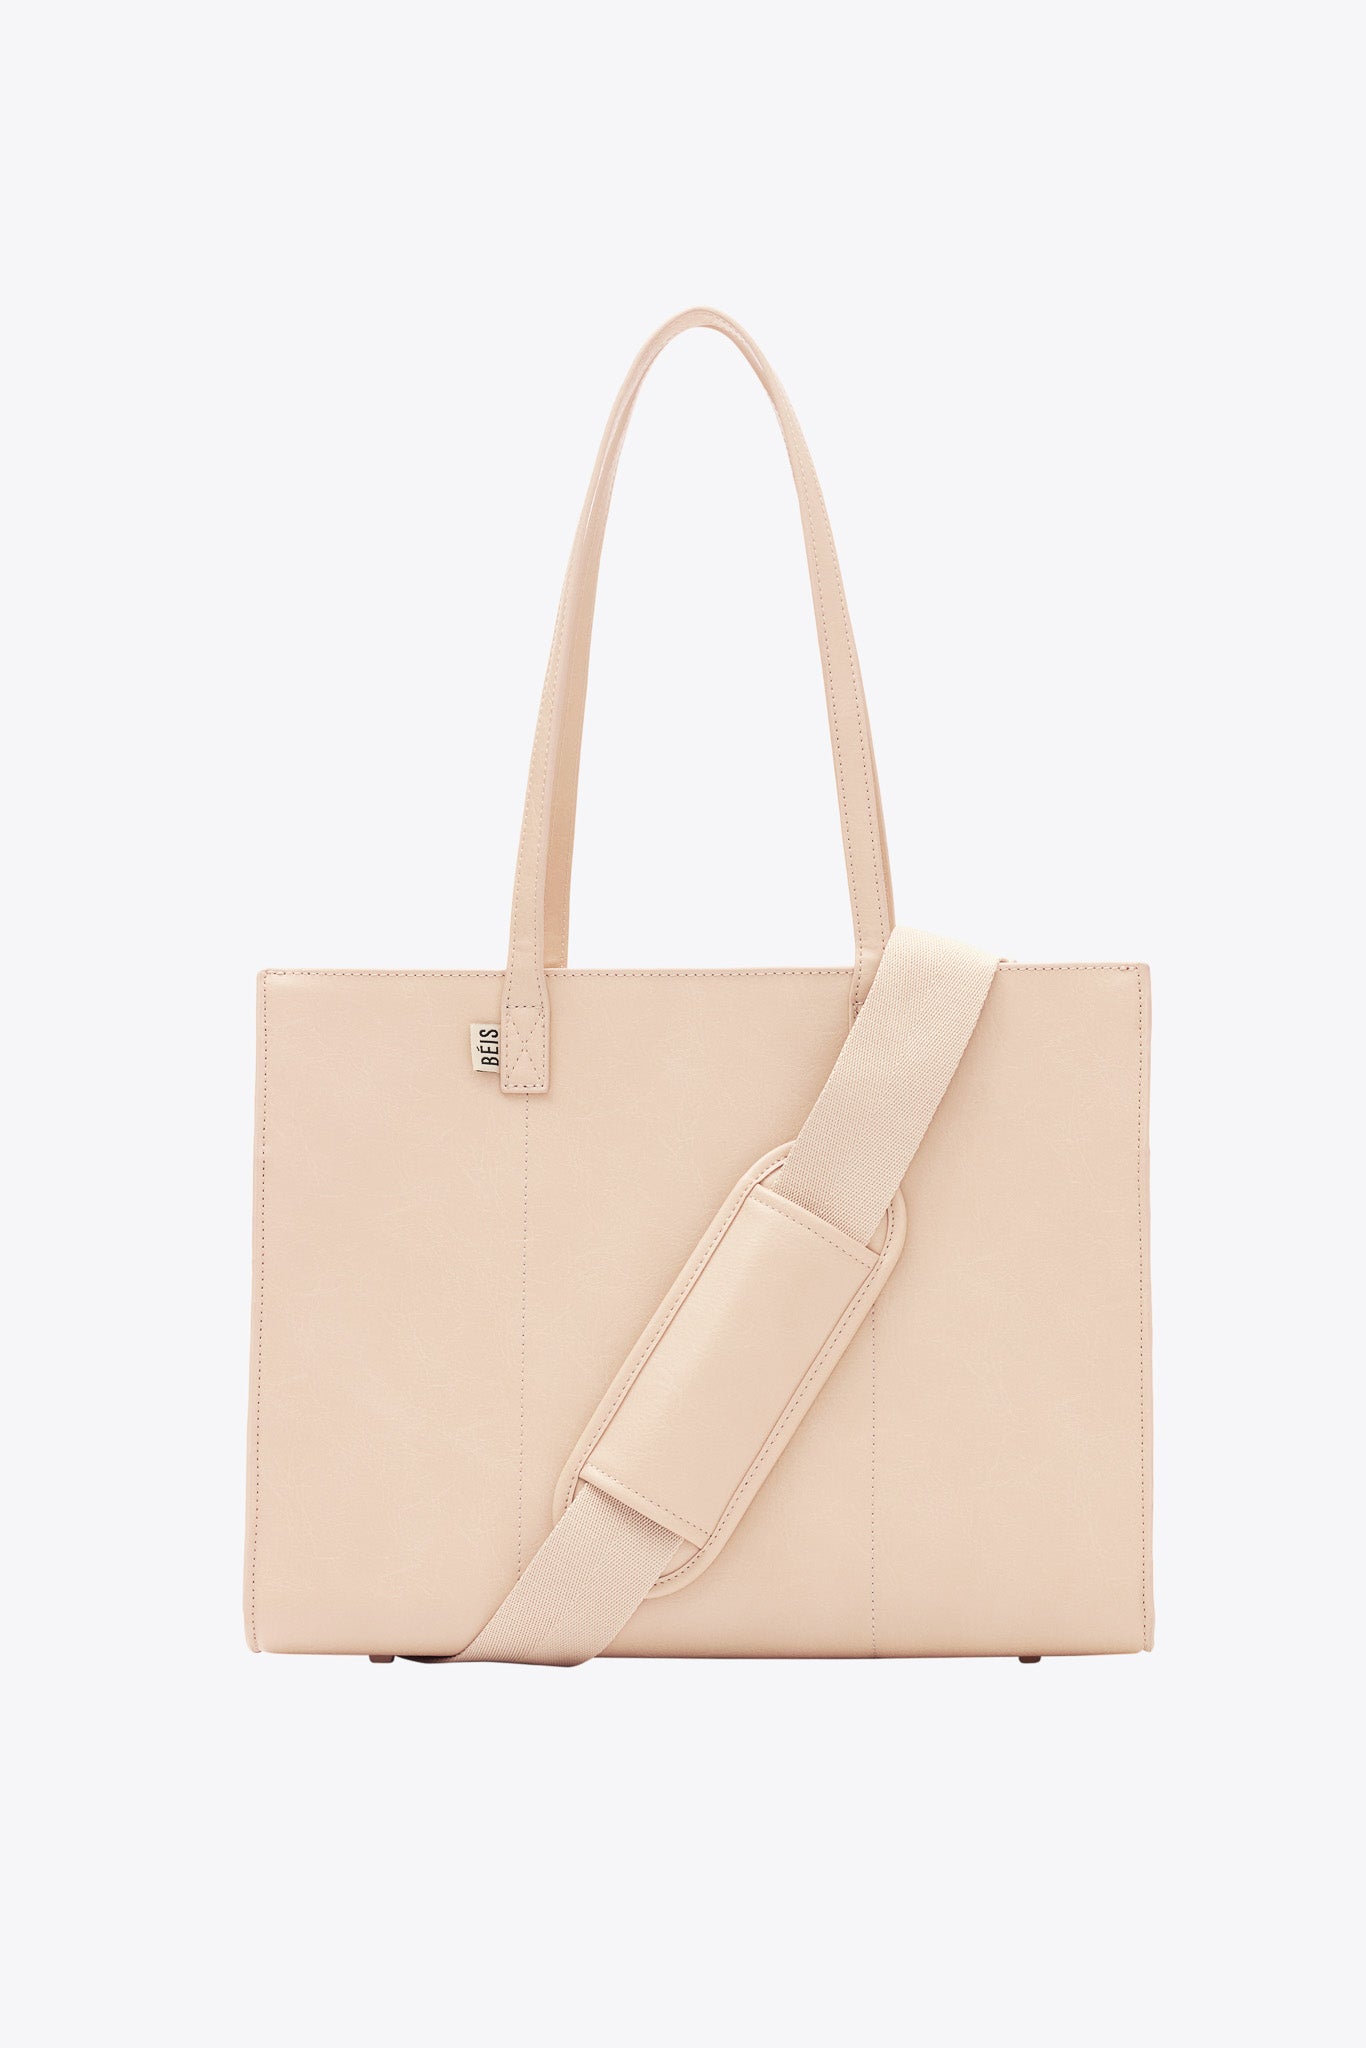 BÉIS 'The Work Tote' in Beige - Small Work Bag For Women & Laptop Tote Bag